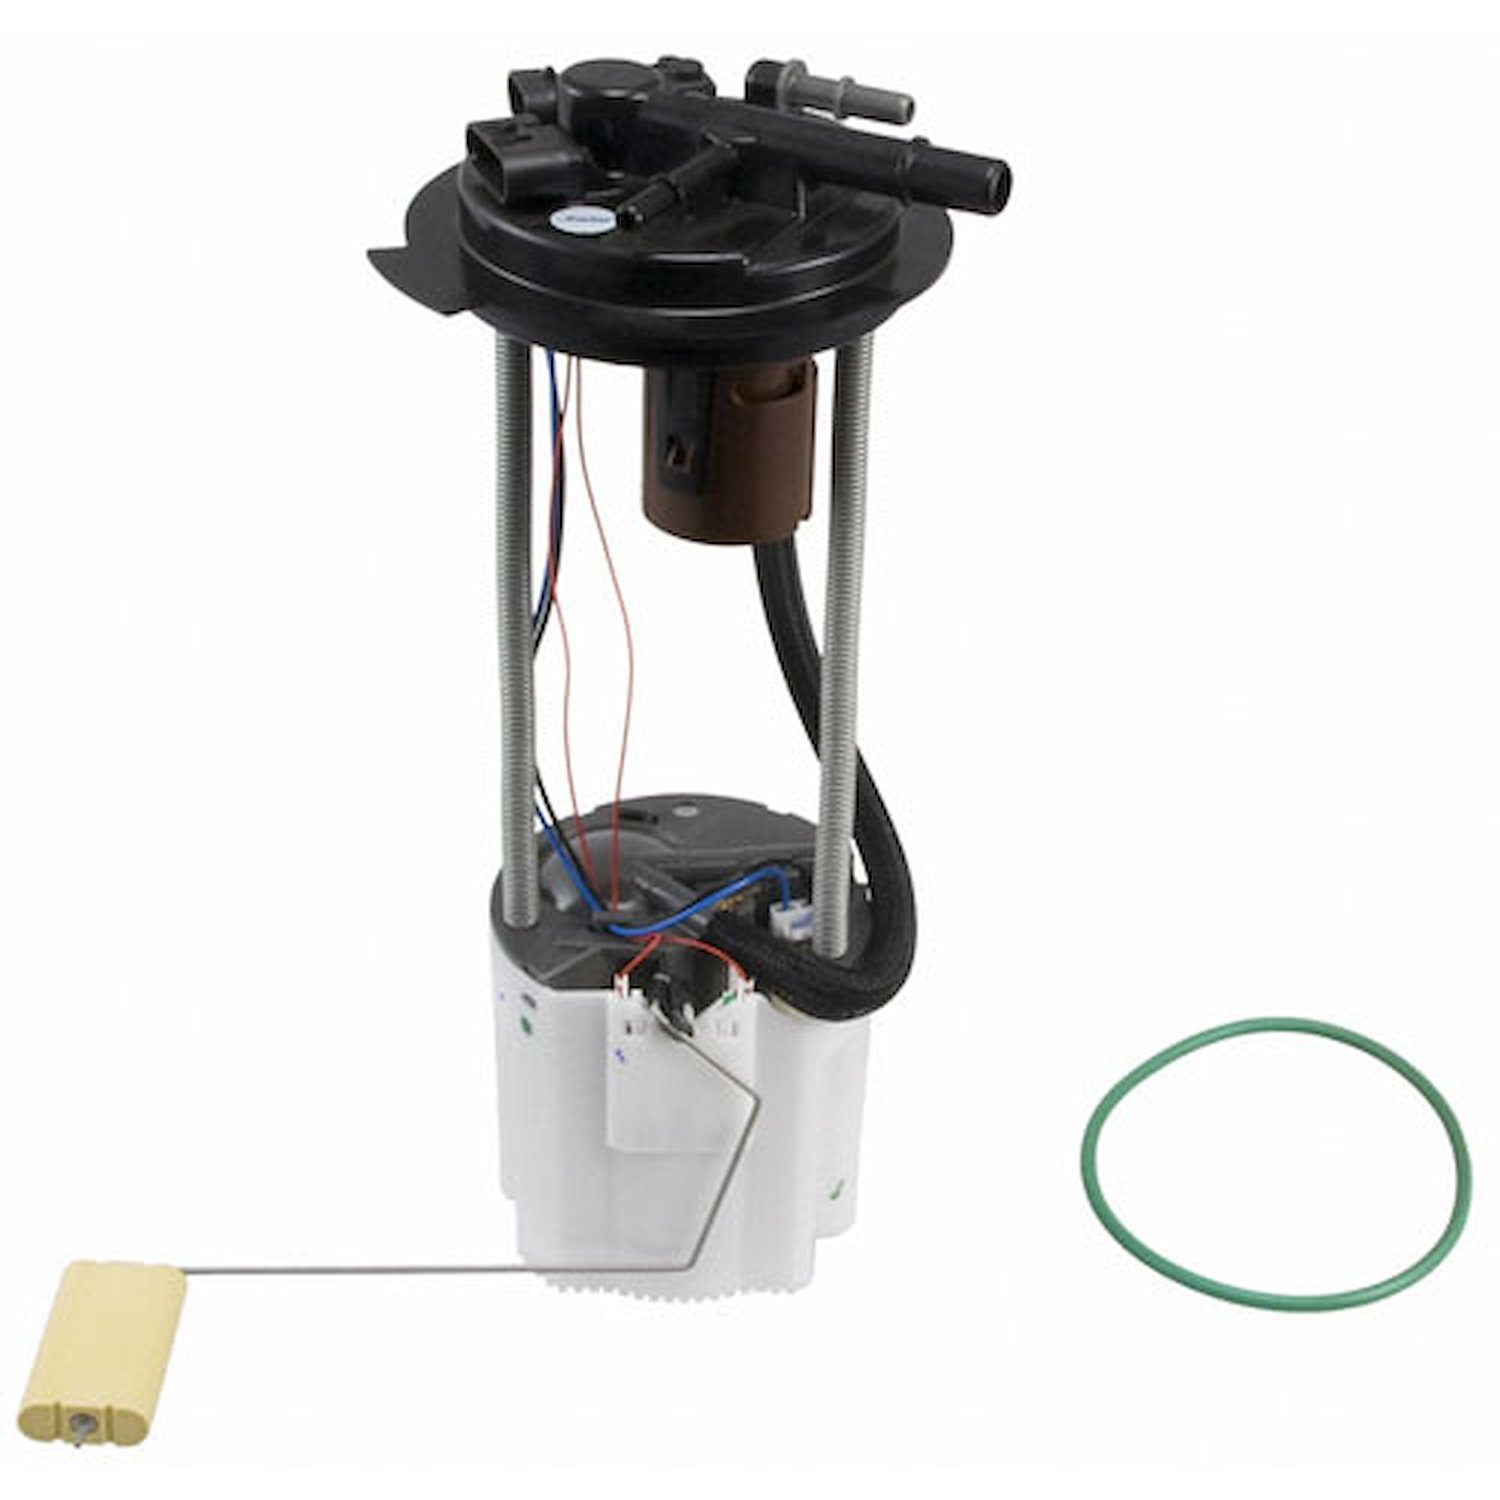 OE GM Replacement Electric Fuel Pump Module Assembly for 2009 Chevy Silverado/GMC Sierra